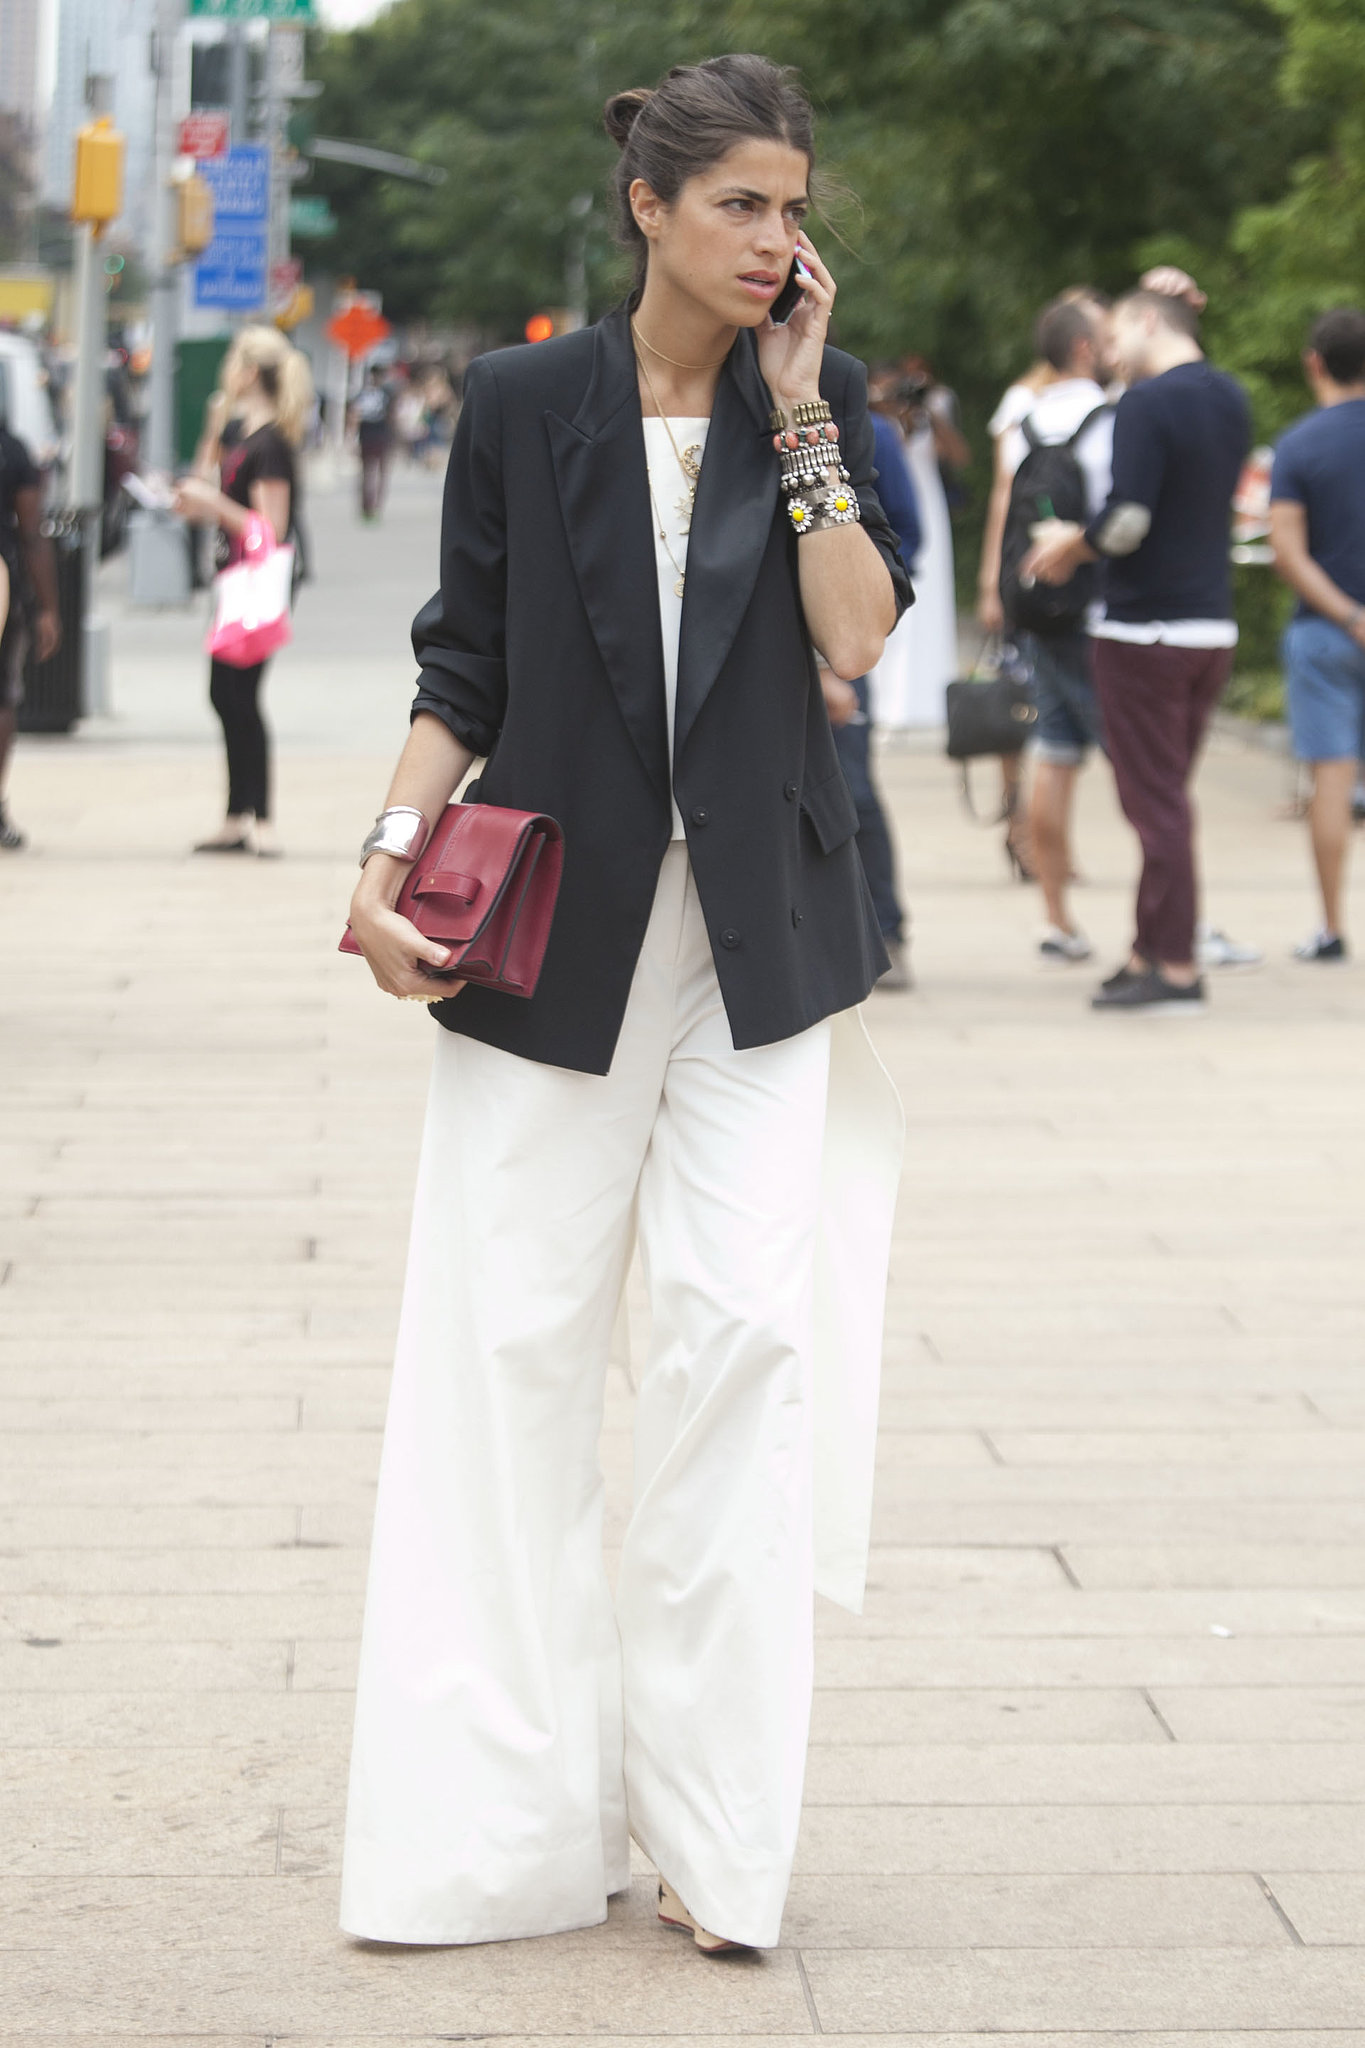 Leandra Medine showed off an armful of jewels and an elegant white and black look. 
